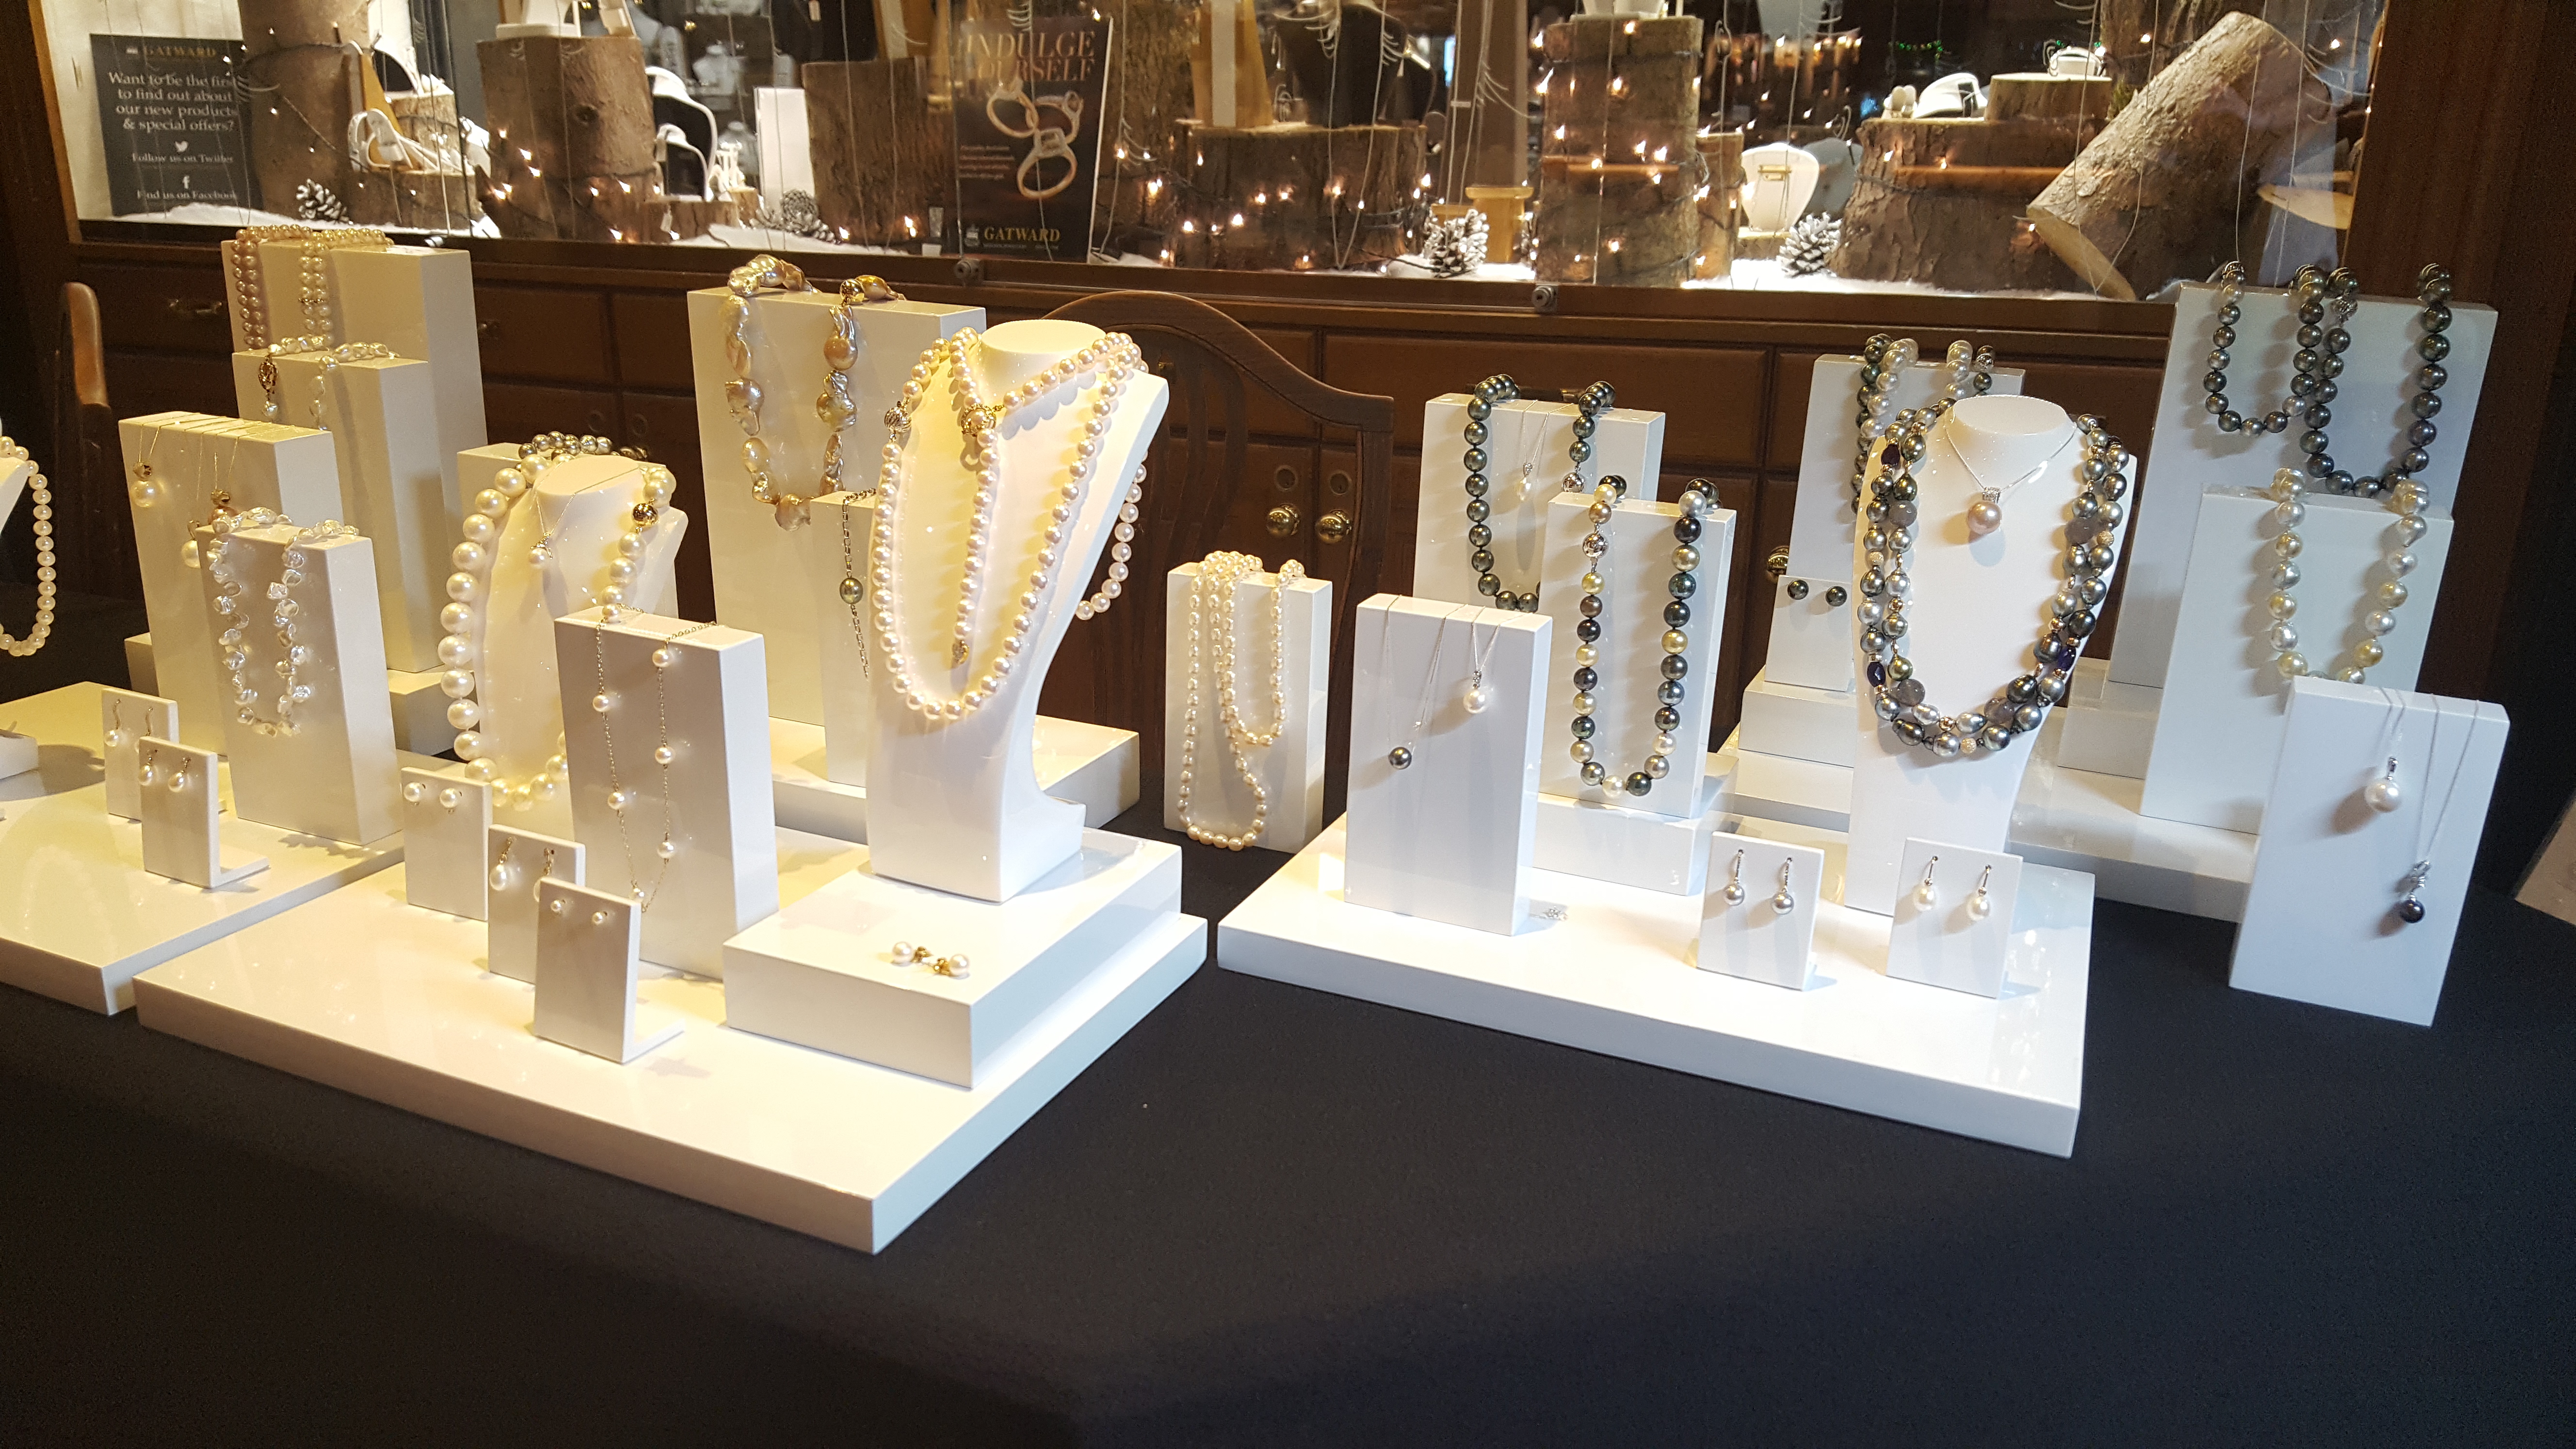 Raw Pearls' beautiful collections on display at Gatwards of Hitchins' 'Gin and Gemstones' evening.